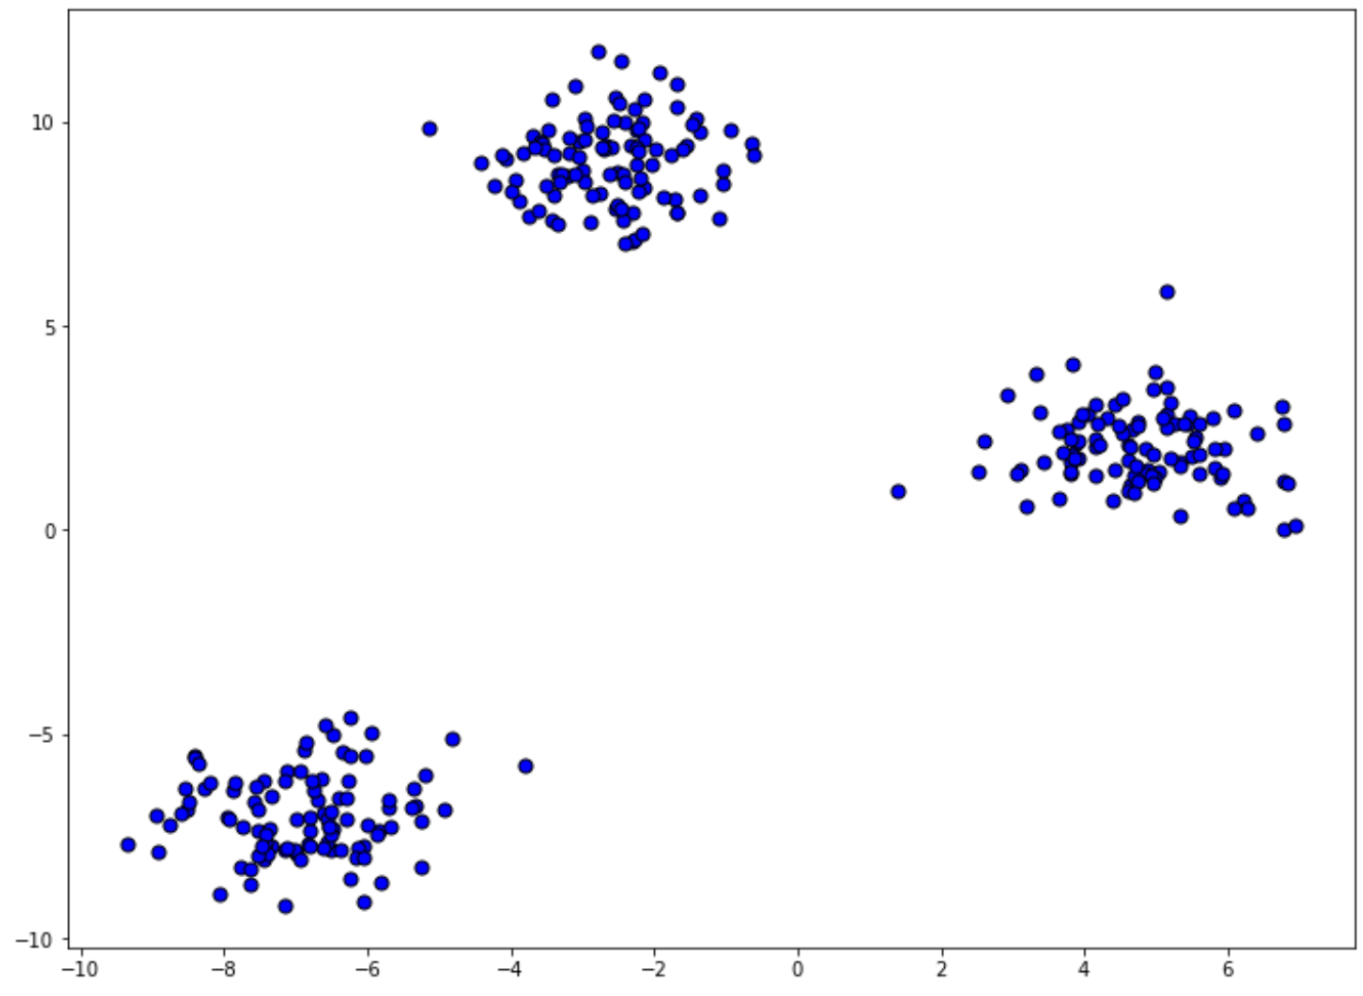 Data points to understand machine learning clustering algorithms